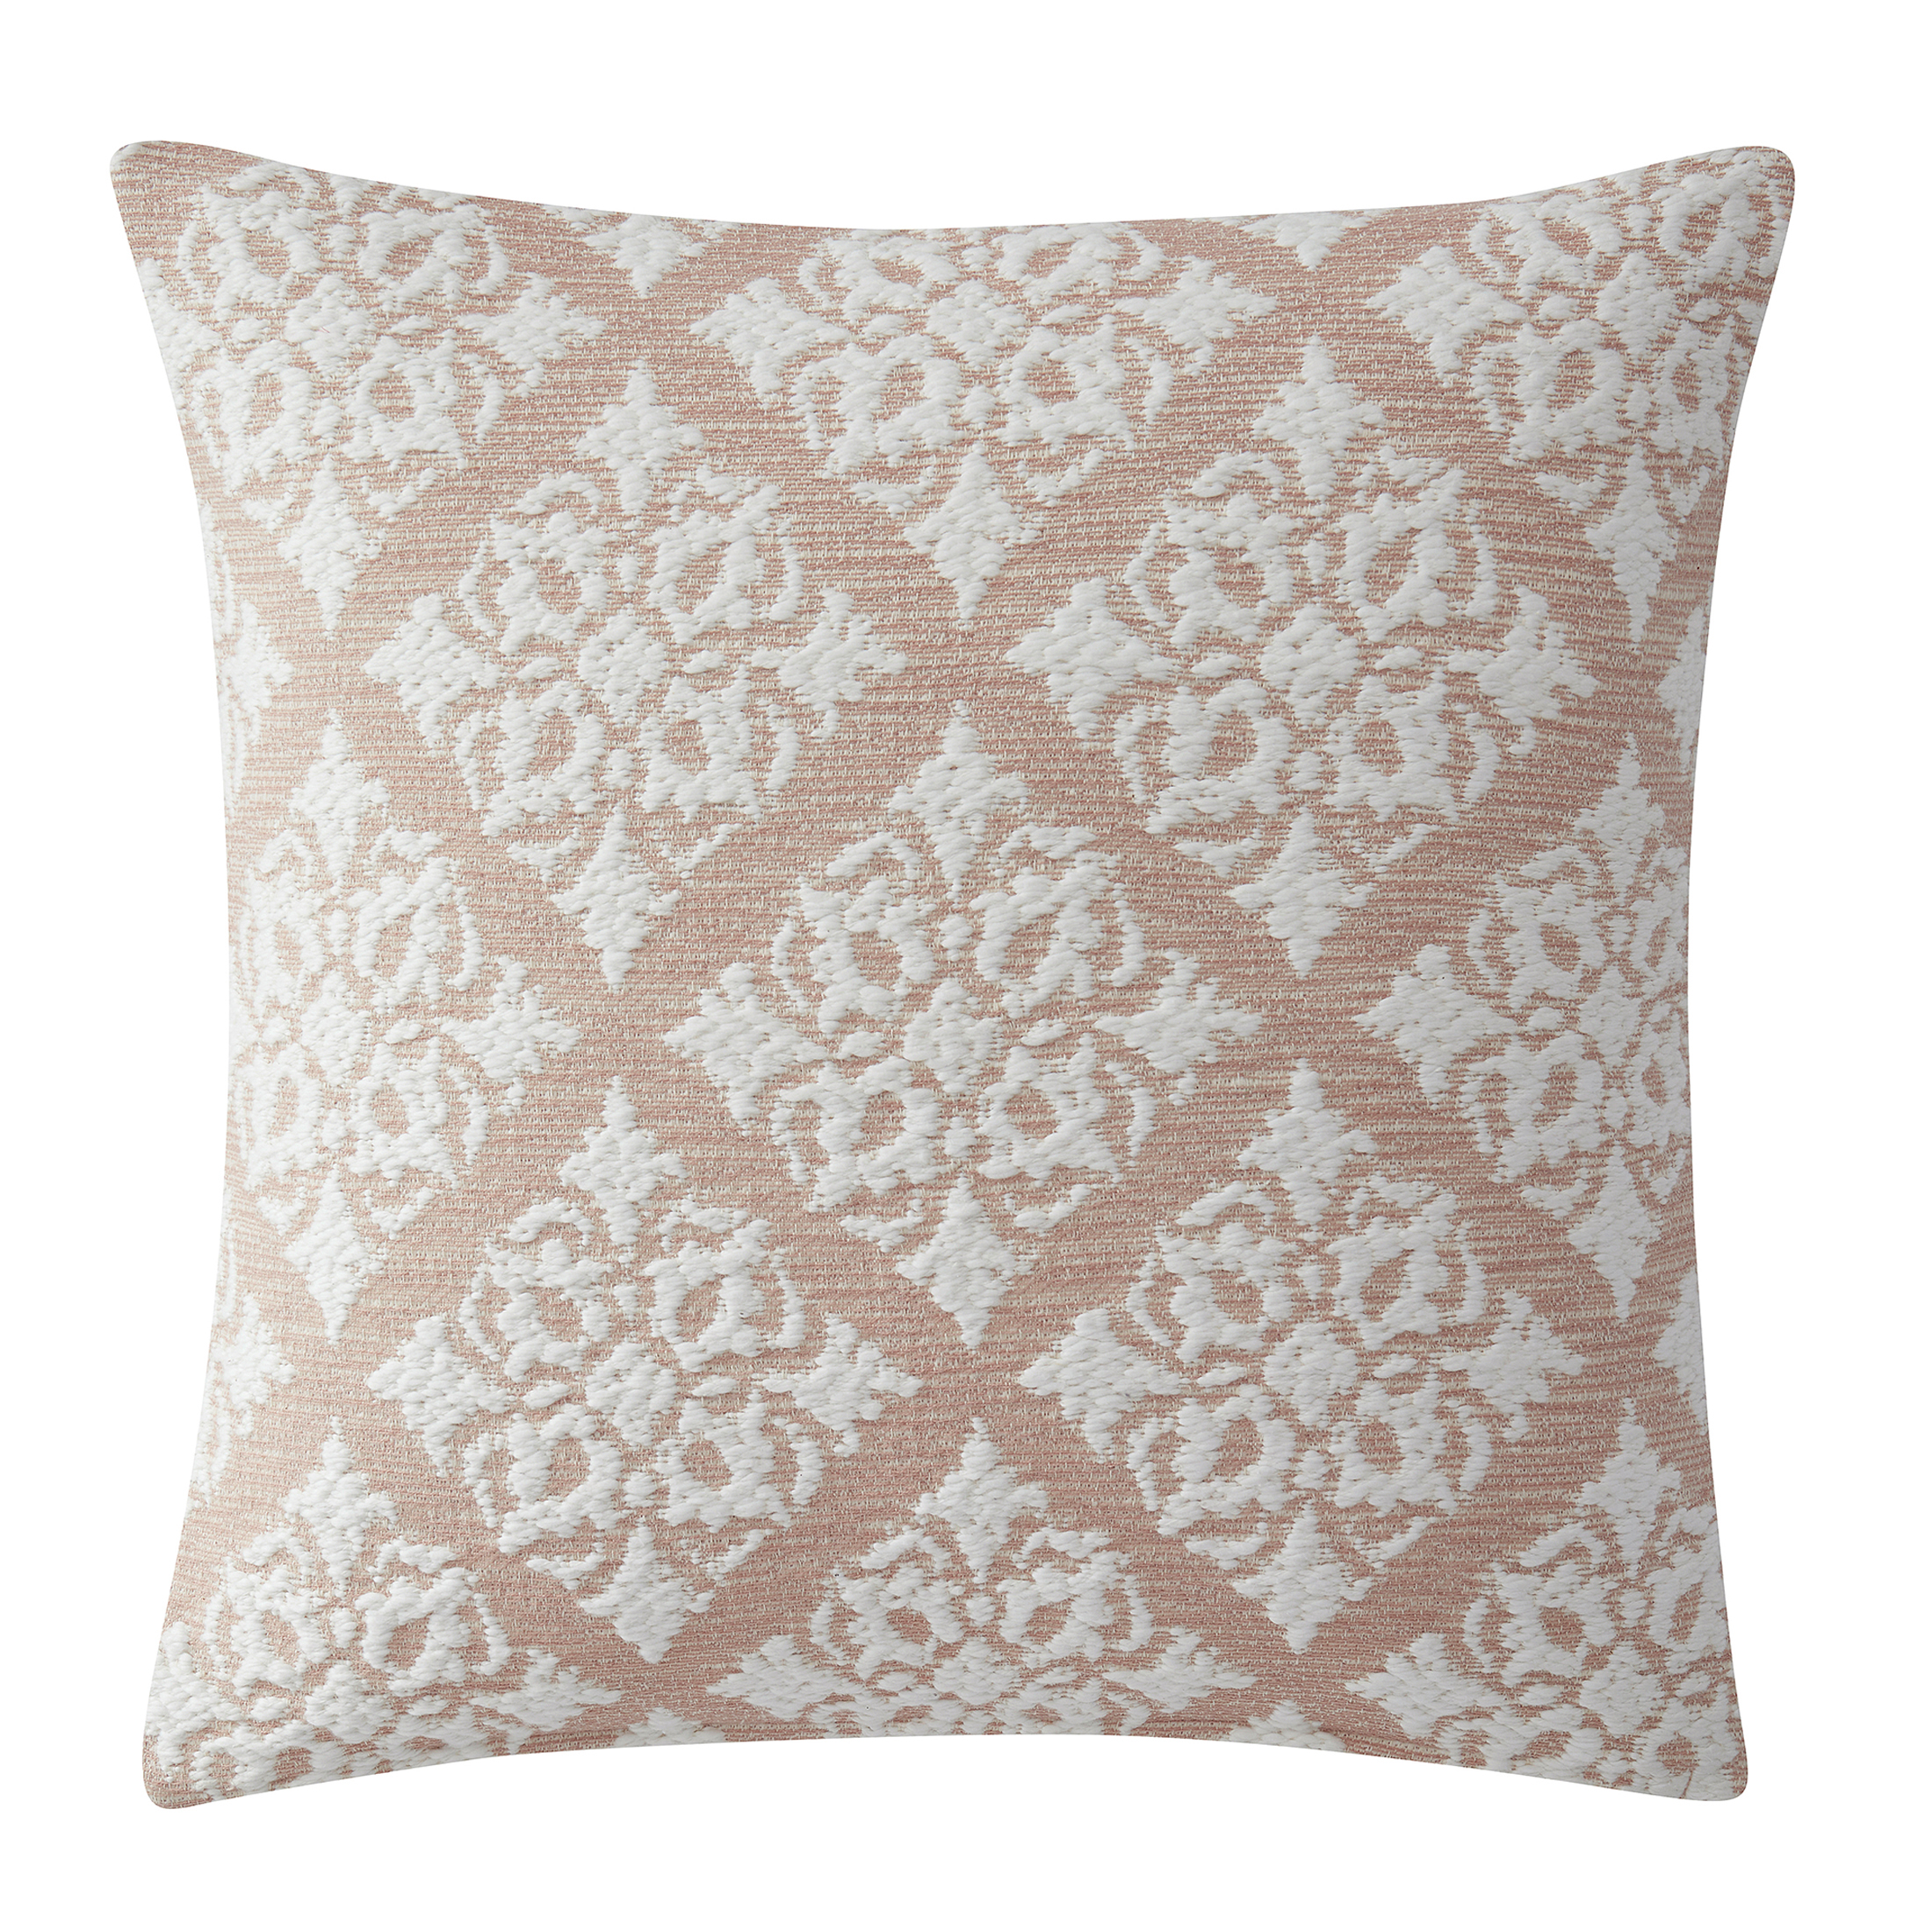 My Texas House Gemma Cotton Decorative Pillow Cover, 18 inchx18 inch, Mahogany Rose, Size: 18 inch x 18 inch